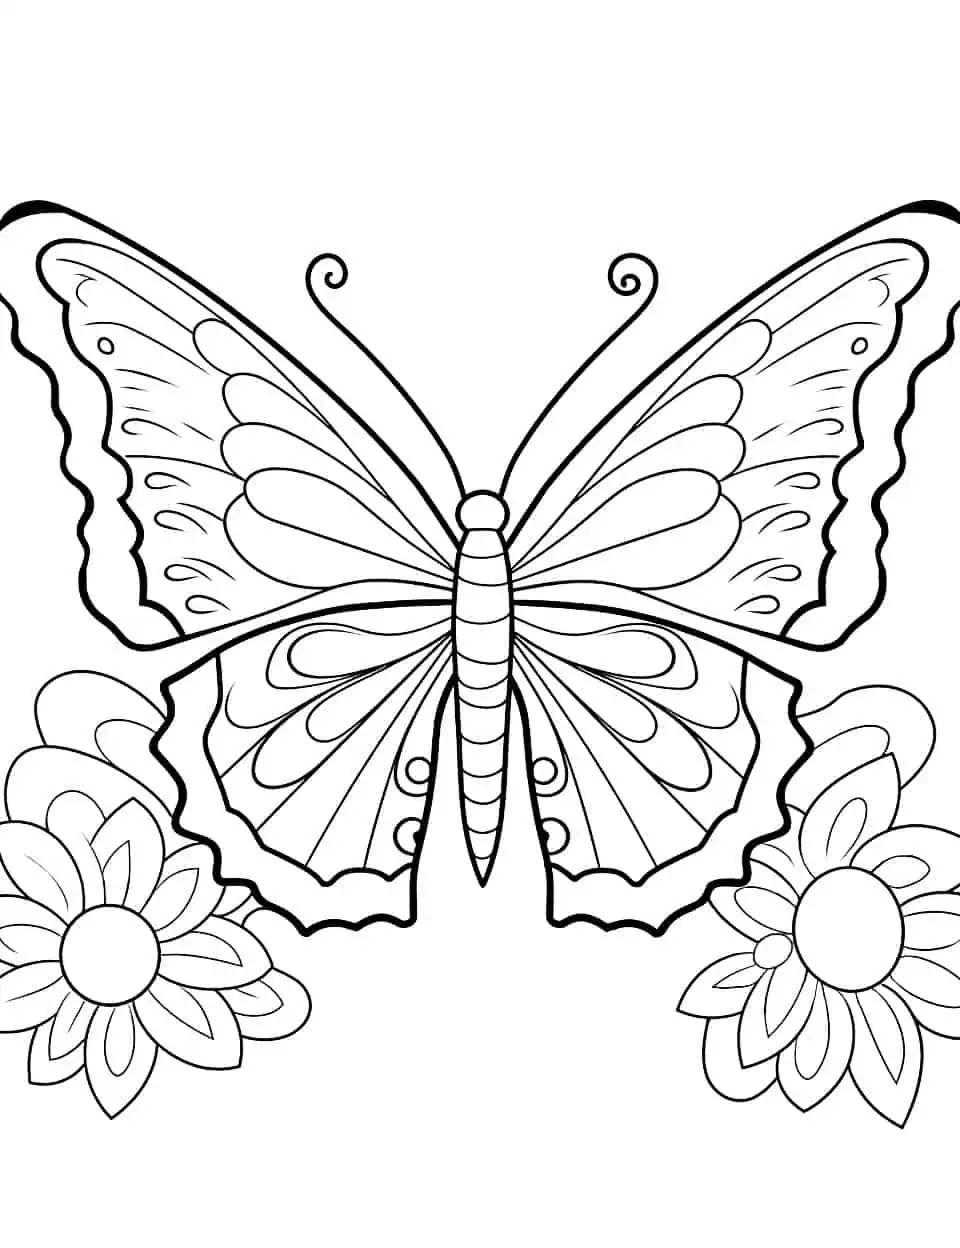 Blooming Beauty Butterfly Coloring Page - A coloring page featuring a butterfly perched on a large, vibrant flower.